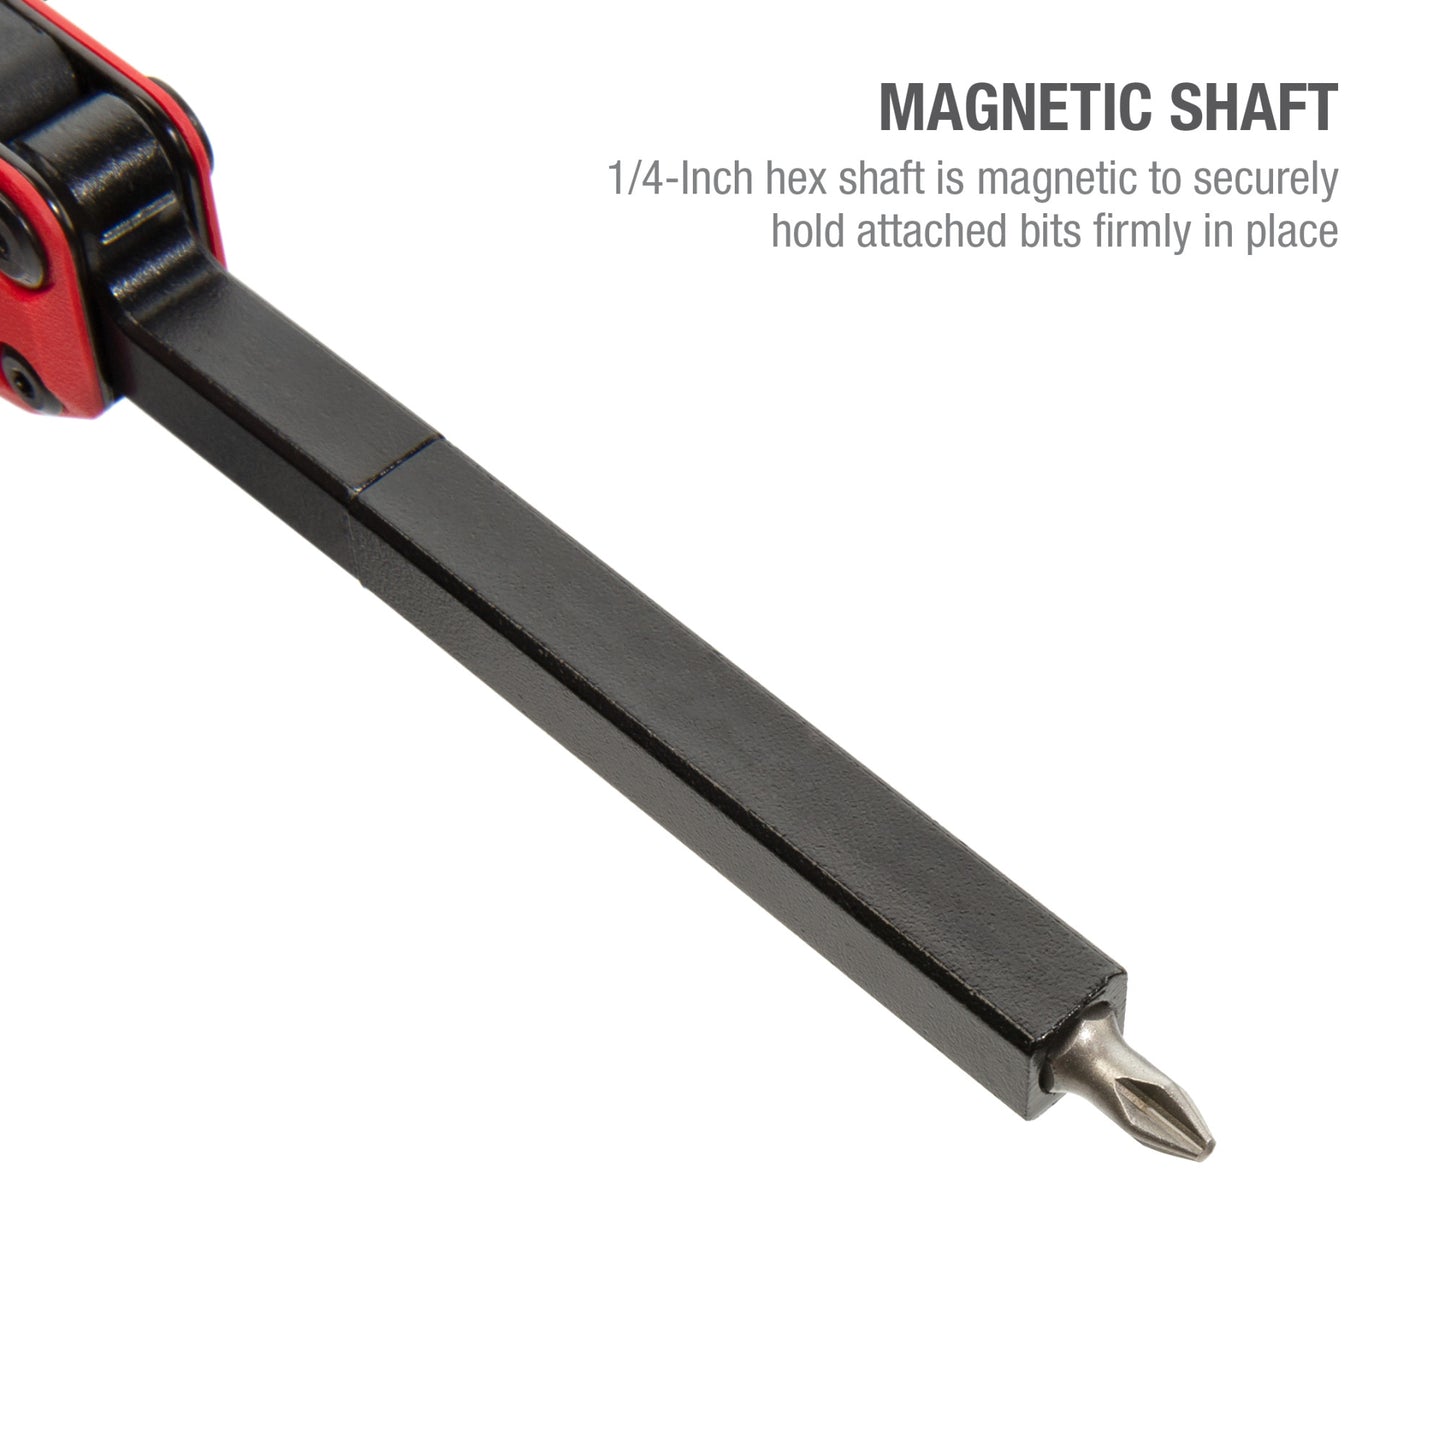 10-In-1 Everyday Carry Folding Magnetic Pocket Screwdriver